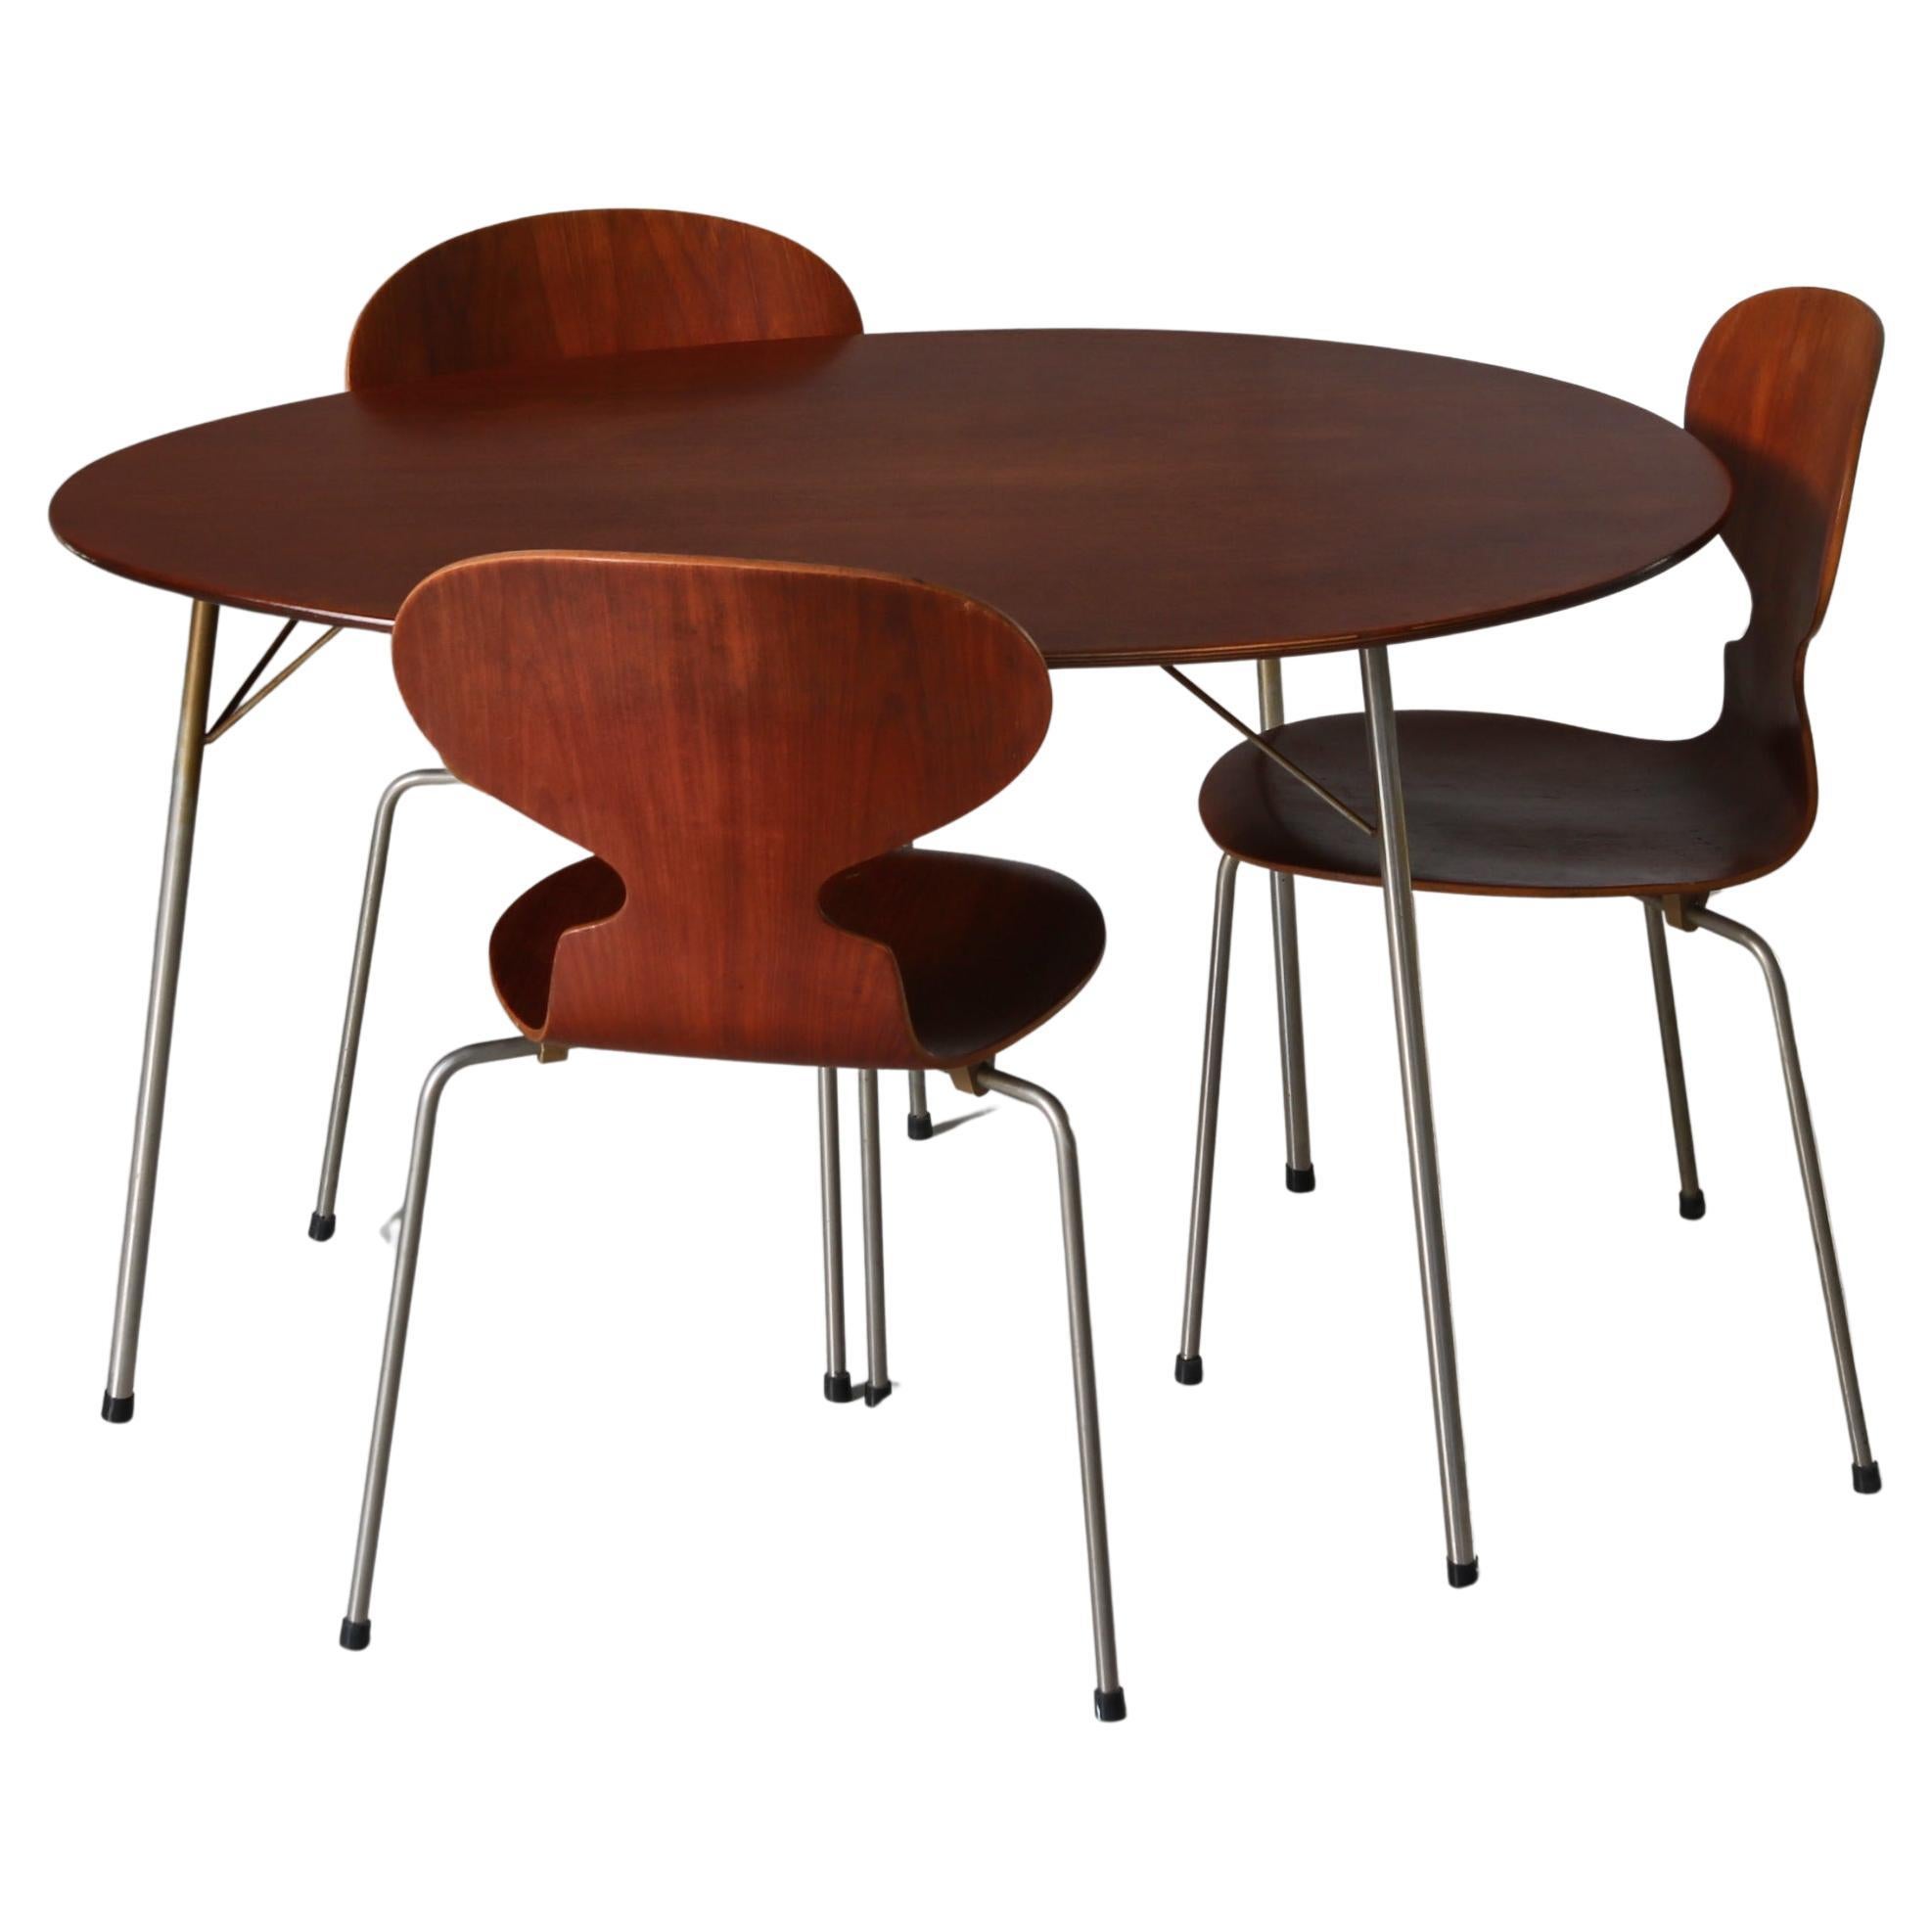 Early Edition Arne Jacobsen Egg Table & Ant Chairs, Teakwood & Steel, 1950s